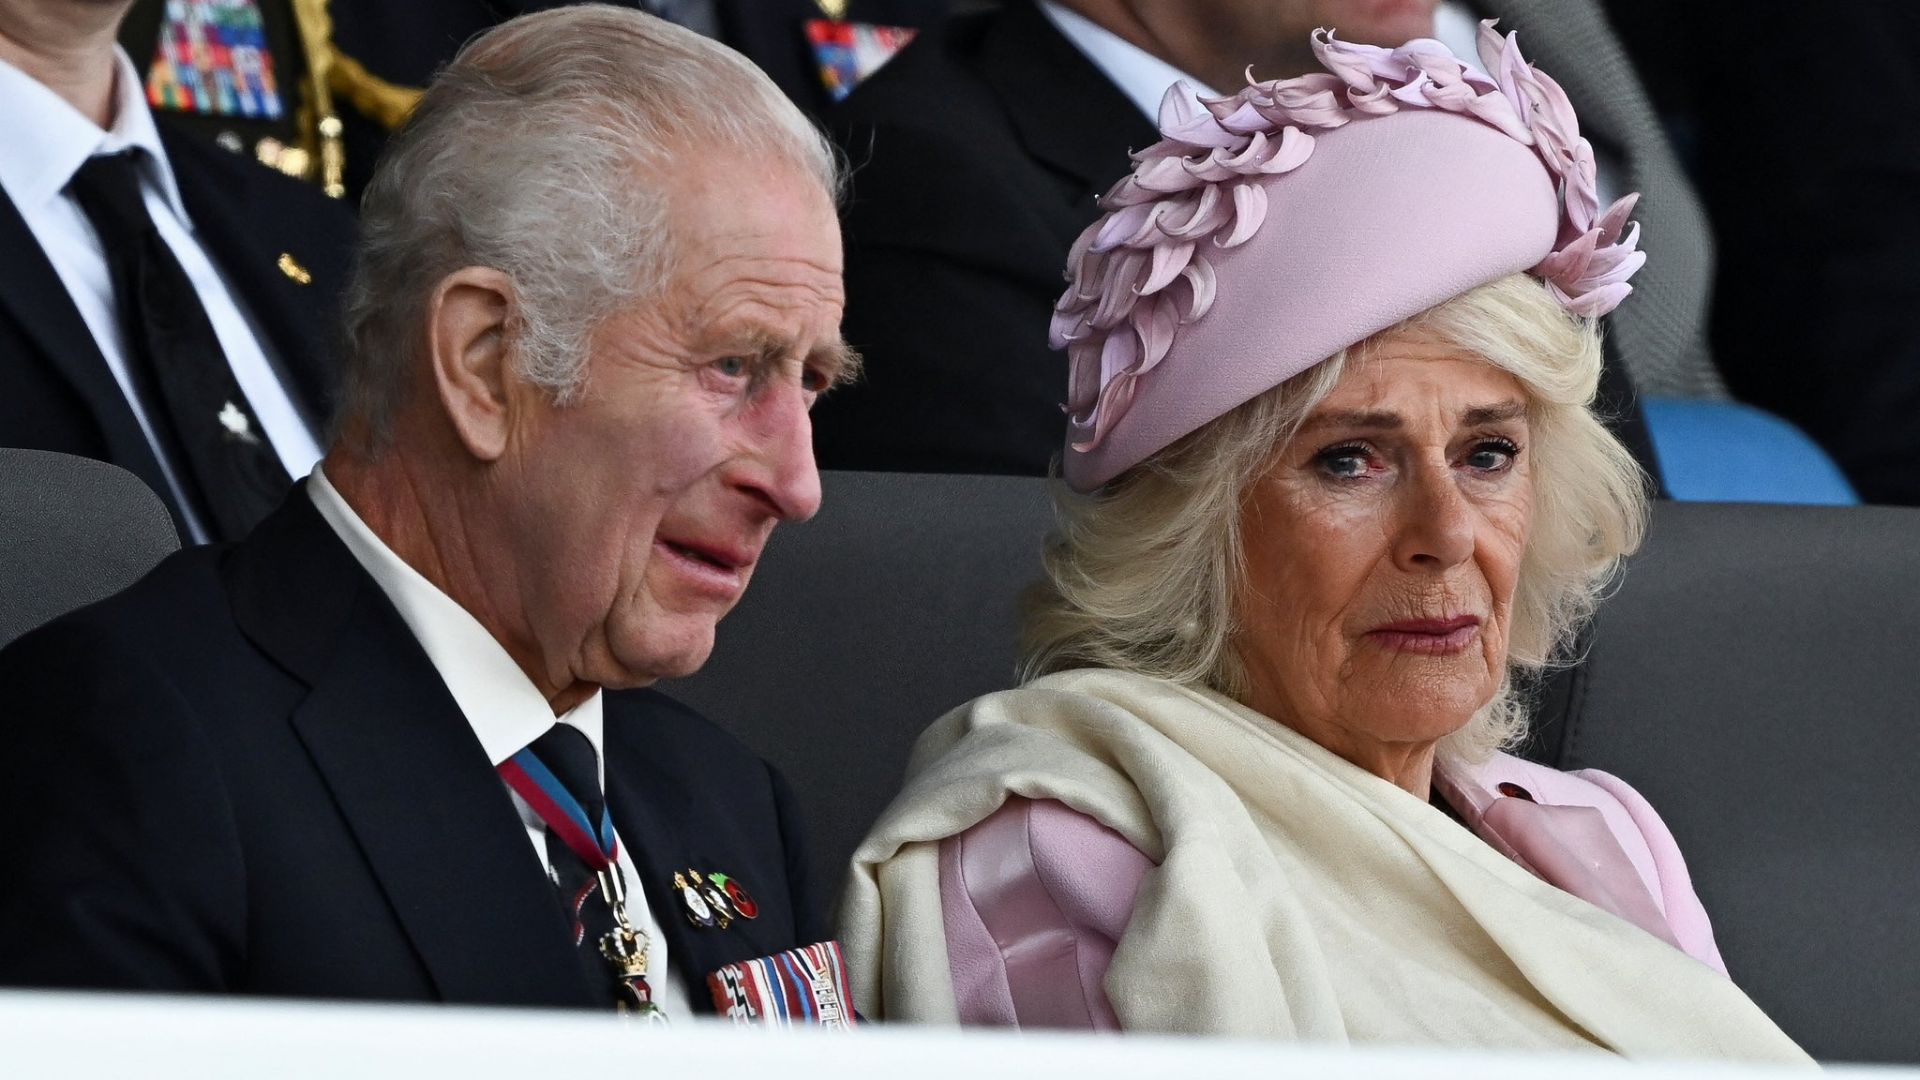 Emotional D-Day Anniversary: King Charles And Queen Camilla Moved To Tears By Heartbreaking Tale